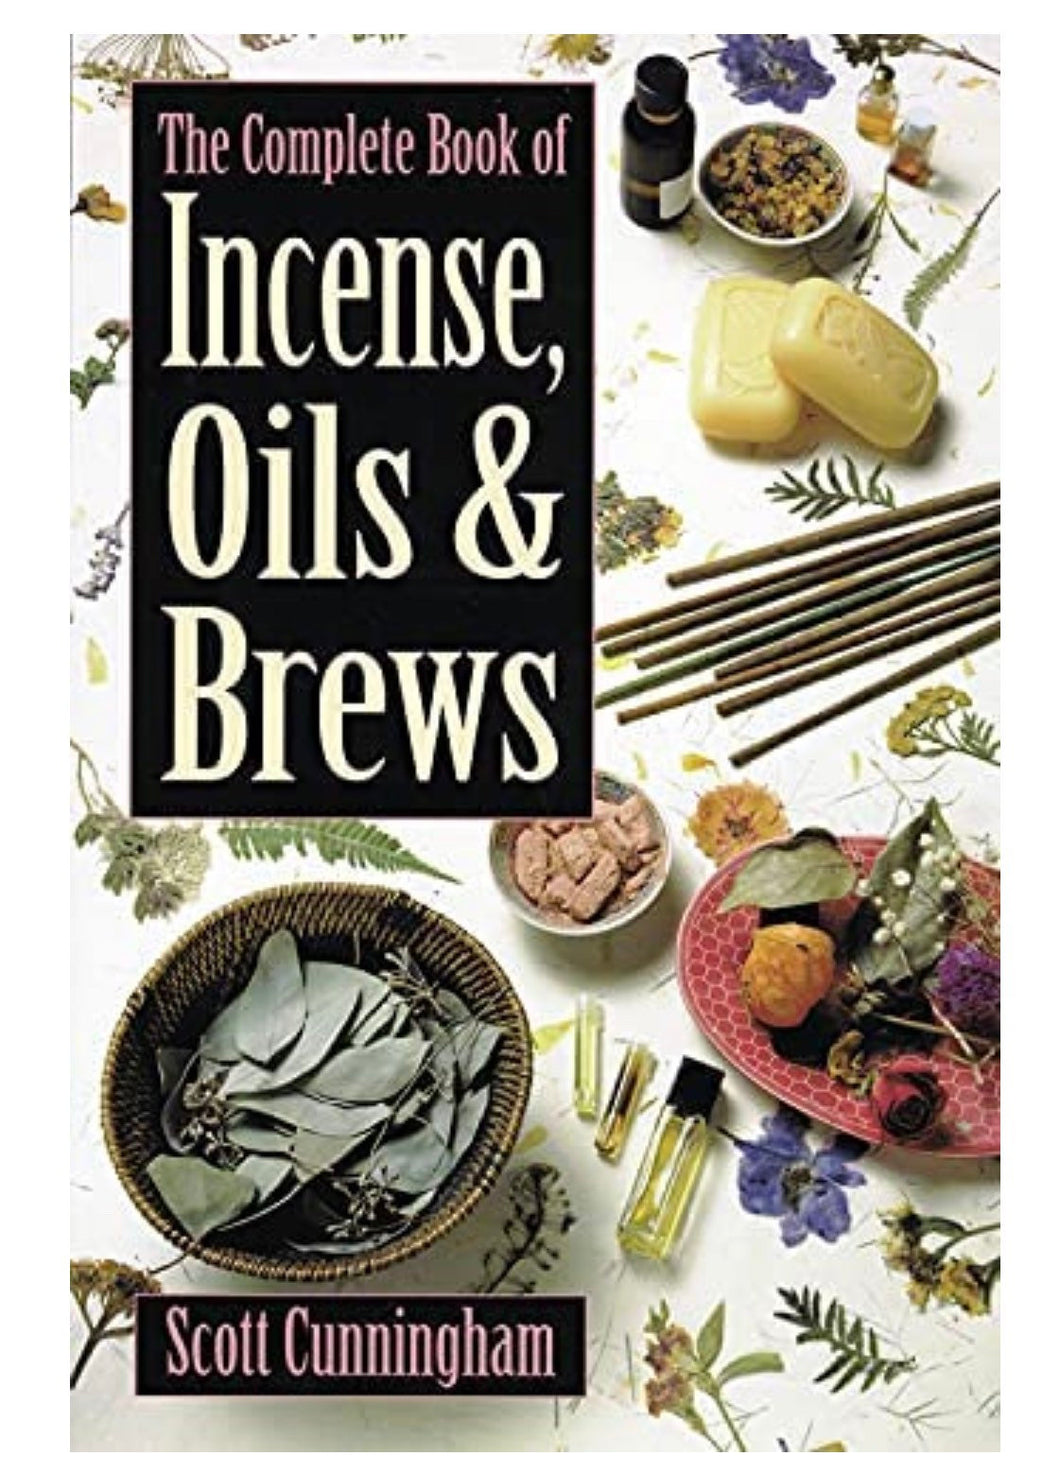 The Complete Book of Incense, Oils and Brews by Scott Cunningham | Witchcraft | Wicca | Ritual | book